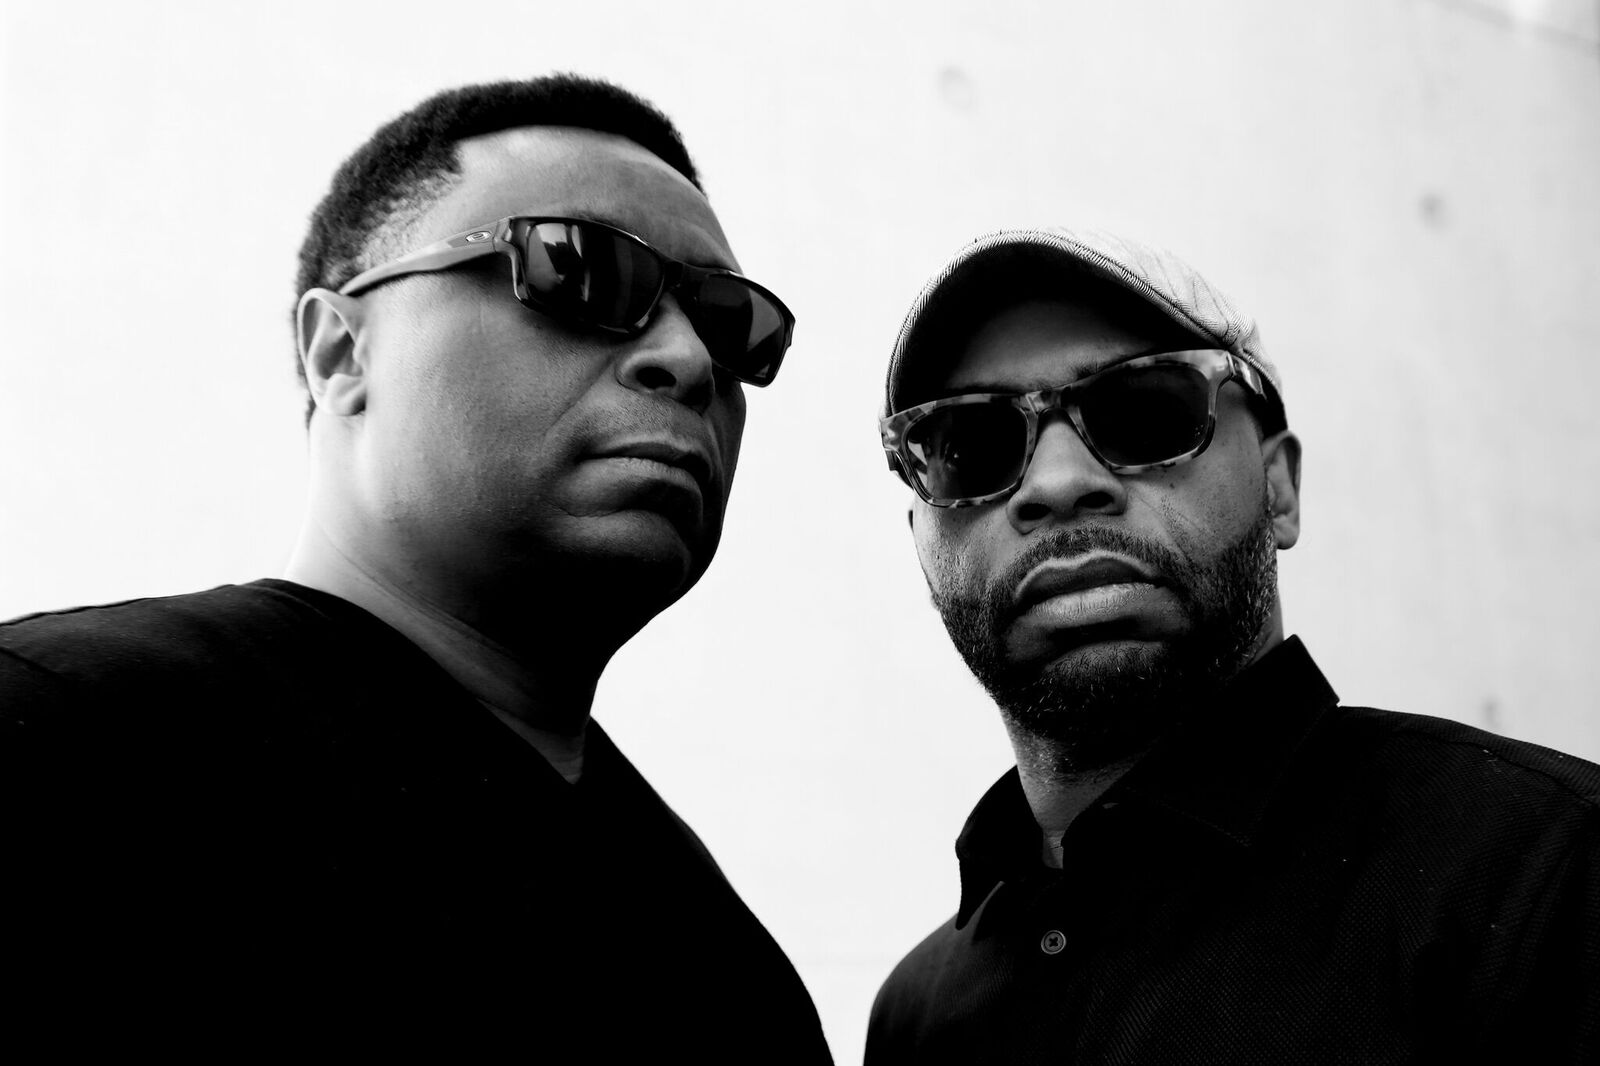 OCTAVE ONE announces SPECIAL ‘NEVER ON SUNDAY’ LIVE SHOW 2018